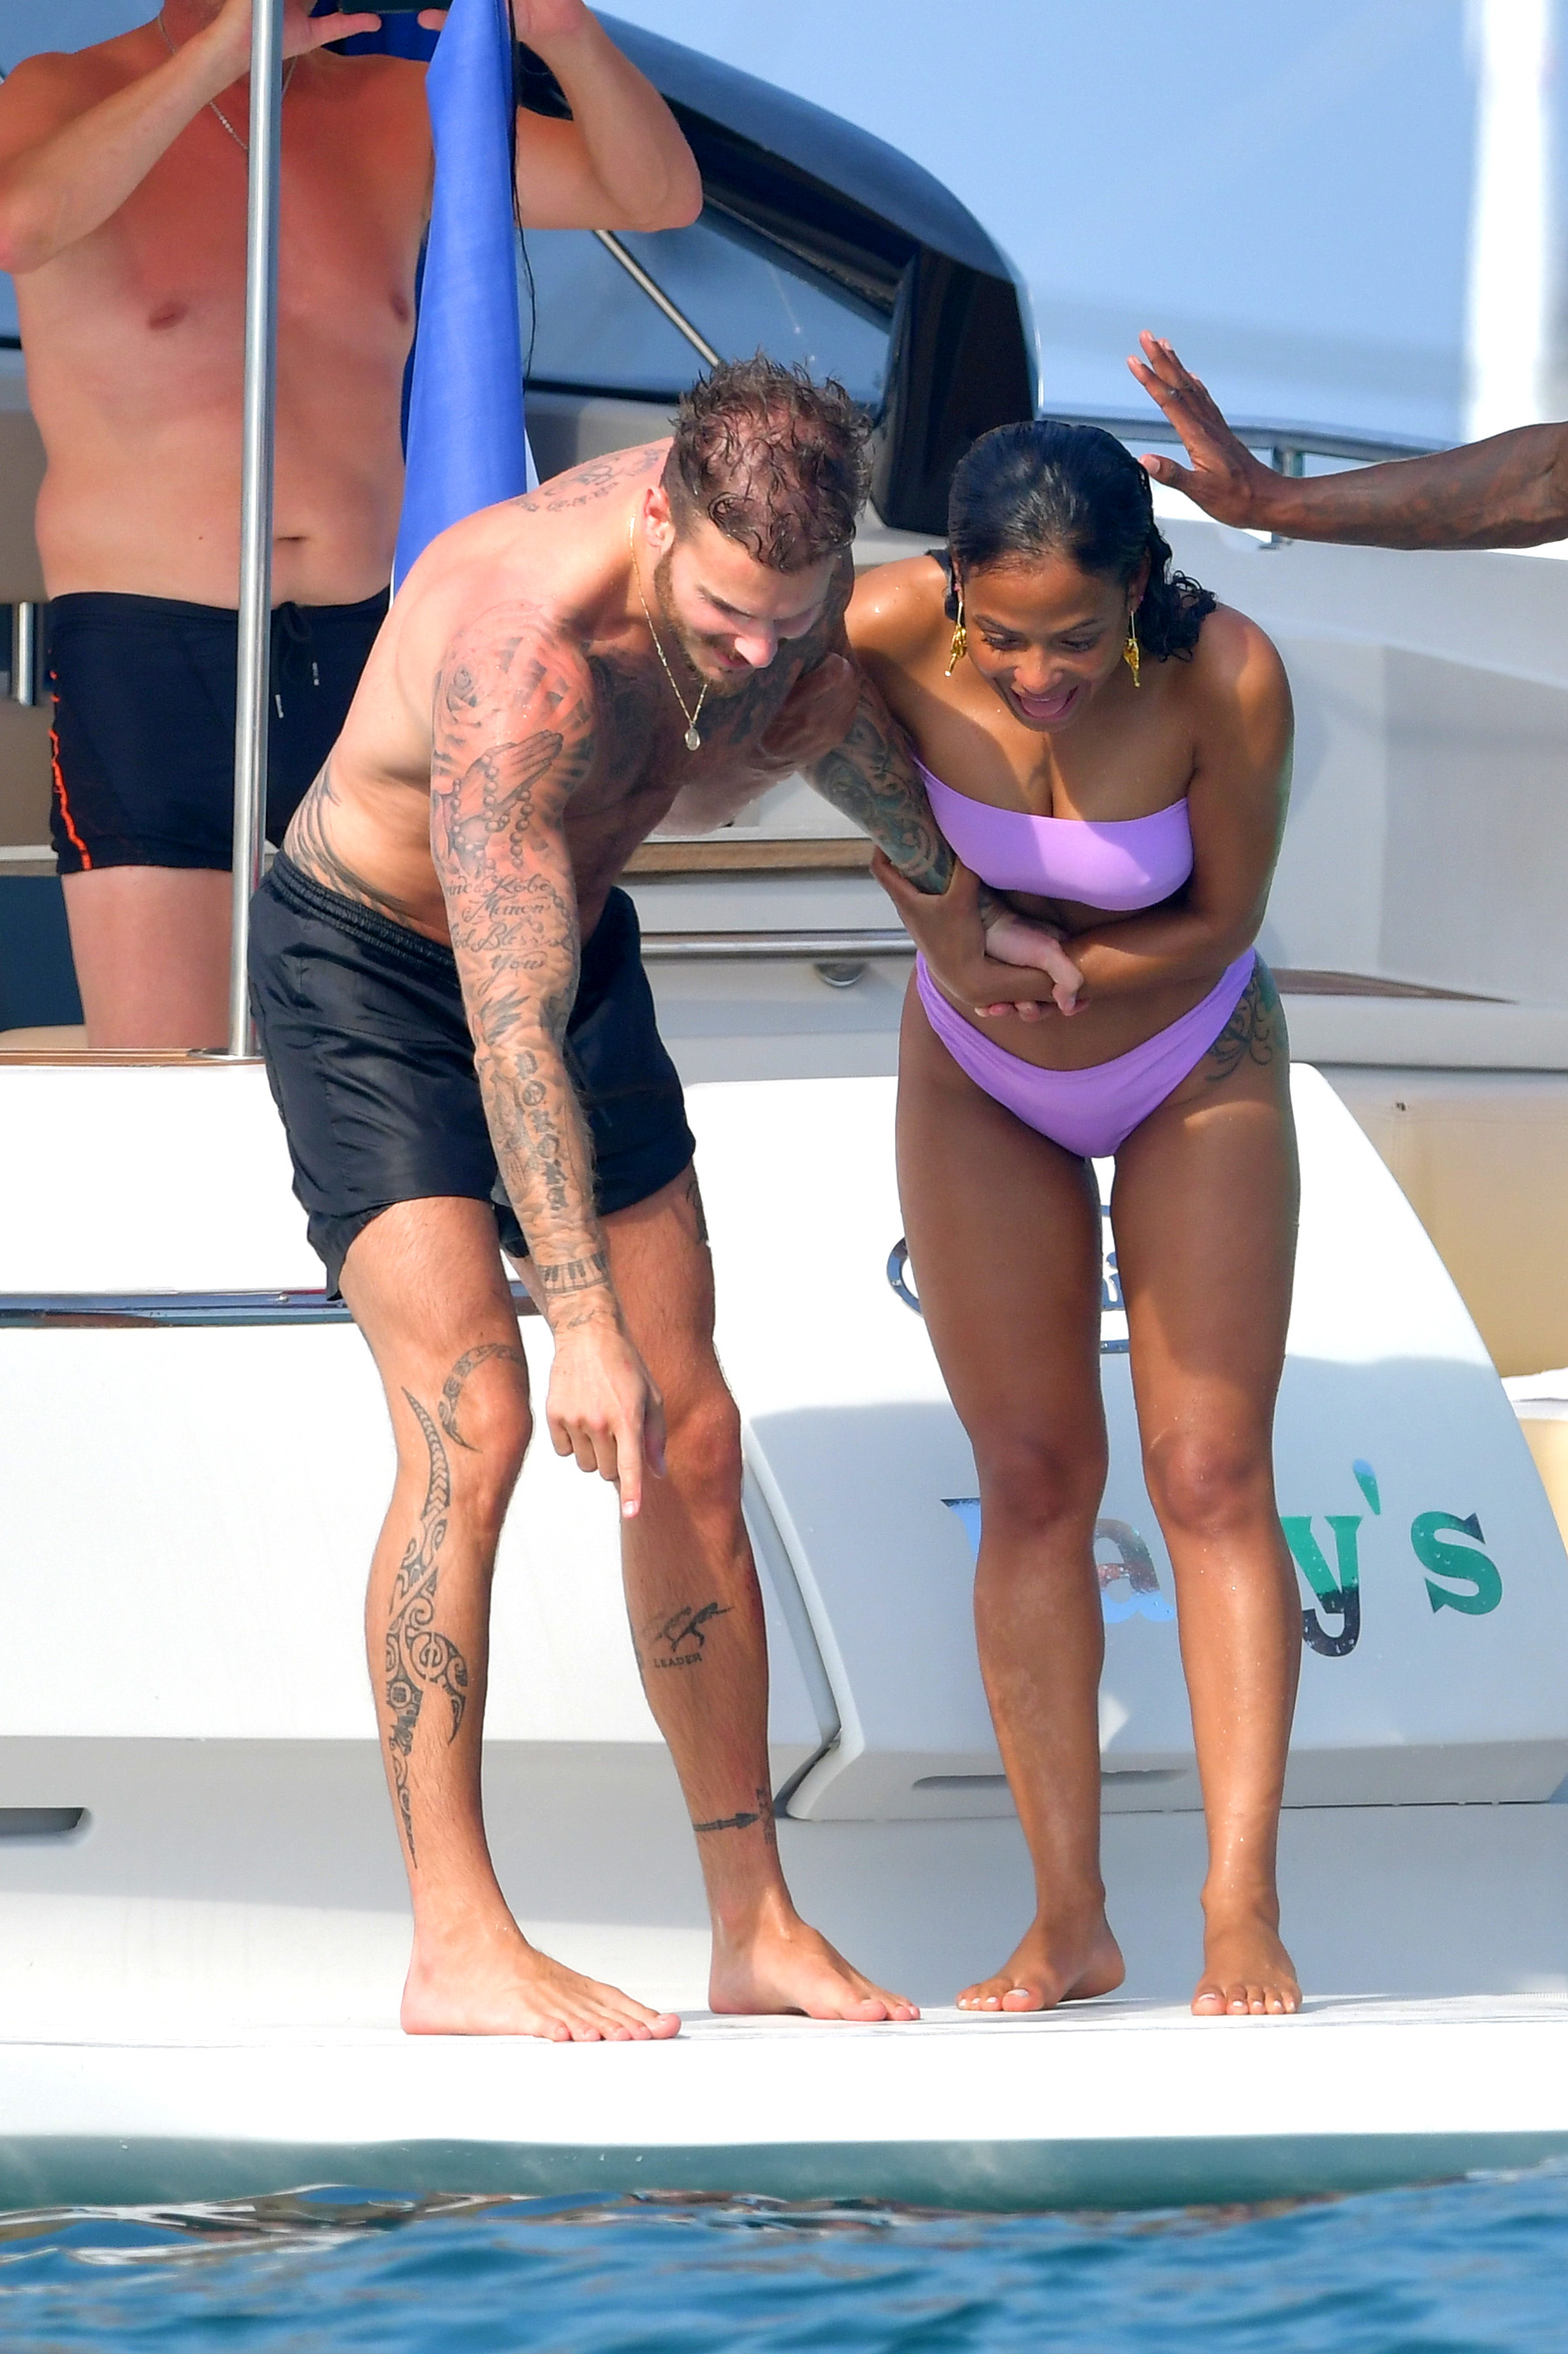 Christina Milian pokies and cameltoe in sexy bikini candids on a boat during holiday UHQ (56).jpg